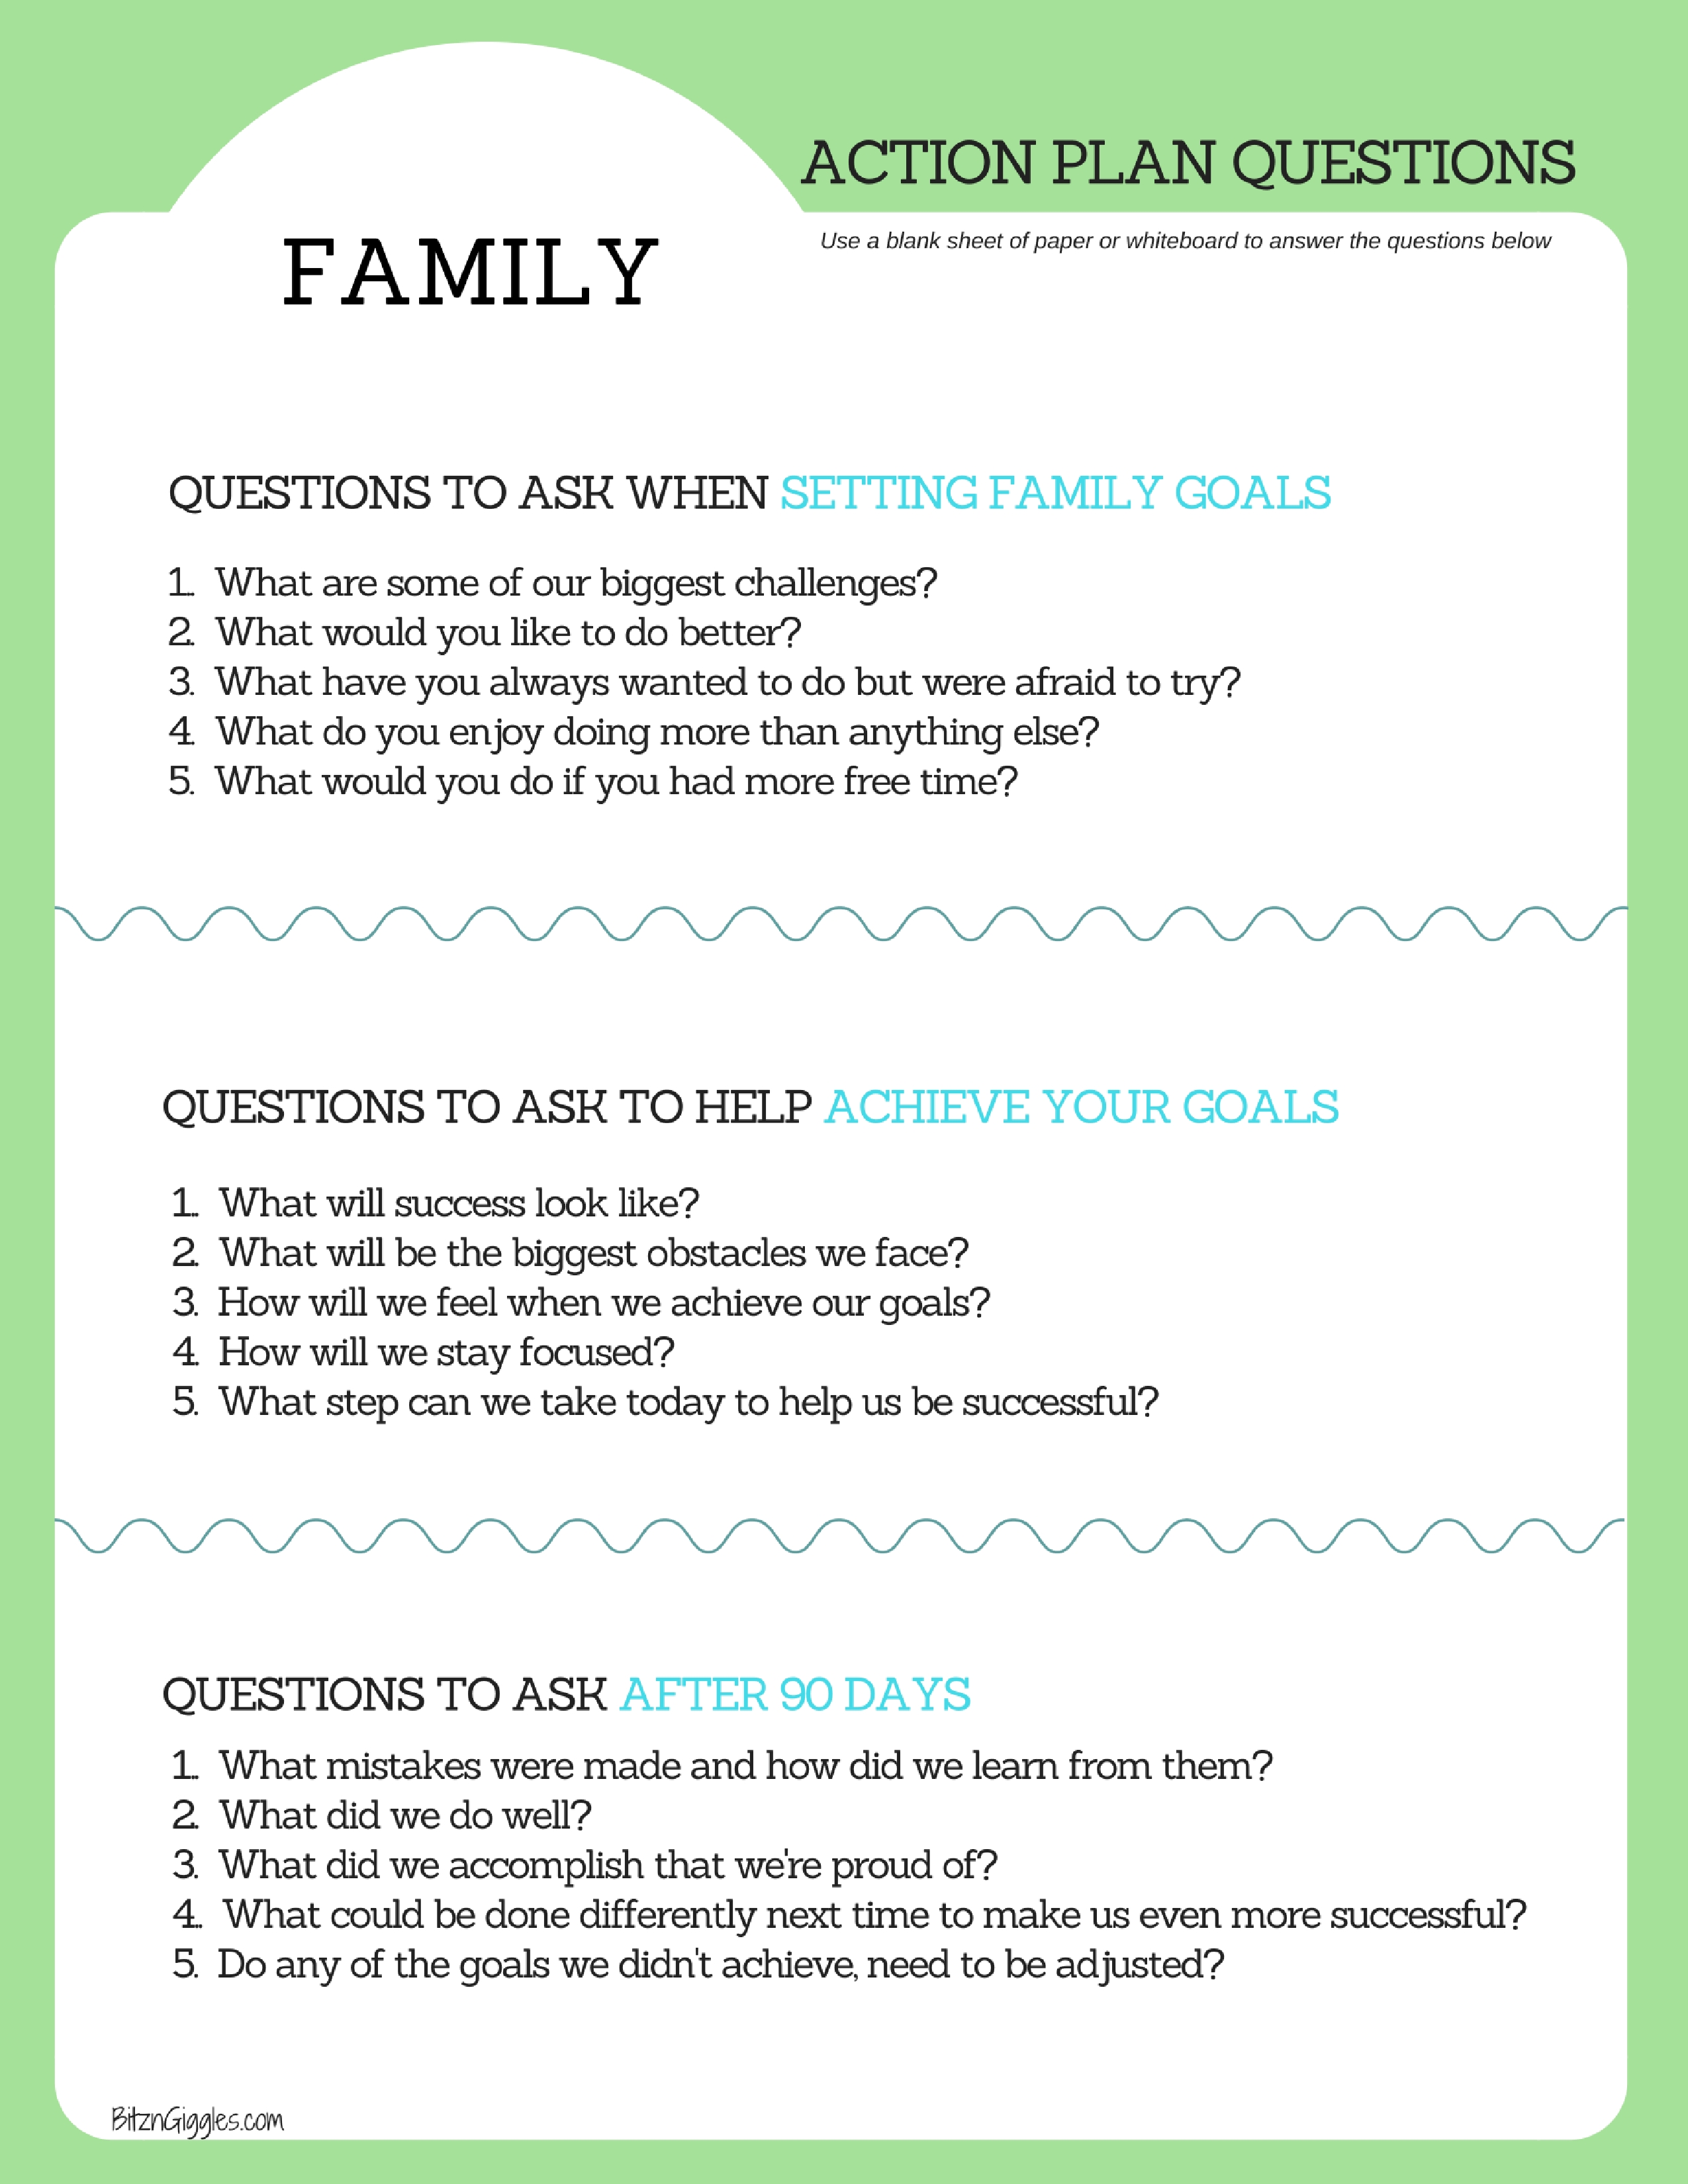 Family Goal Setting Printable - Free 90-day action plan printable to help your family set manageable goals you can work together to achieve. 